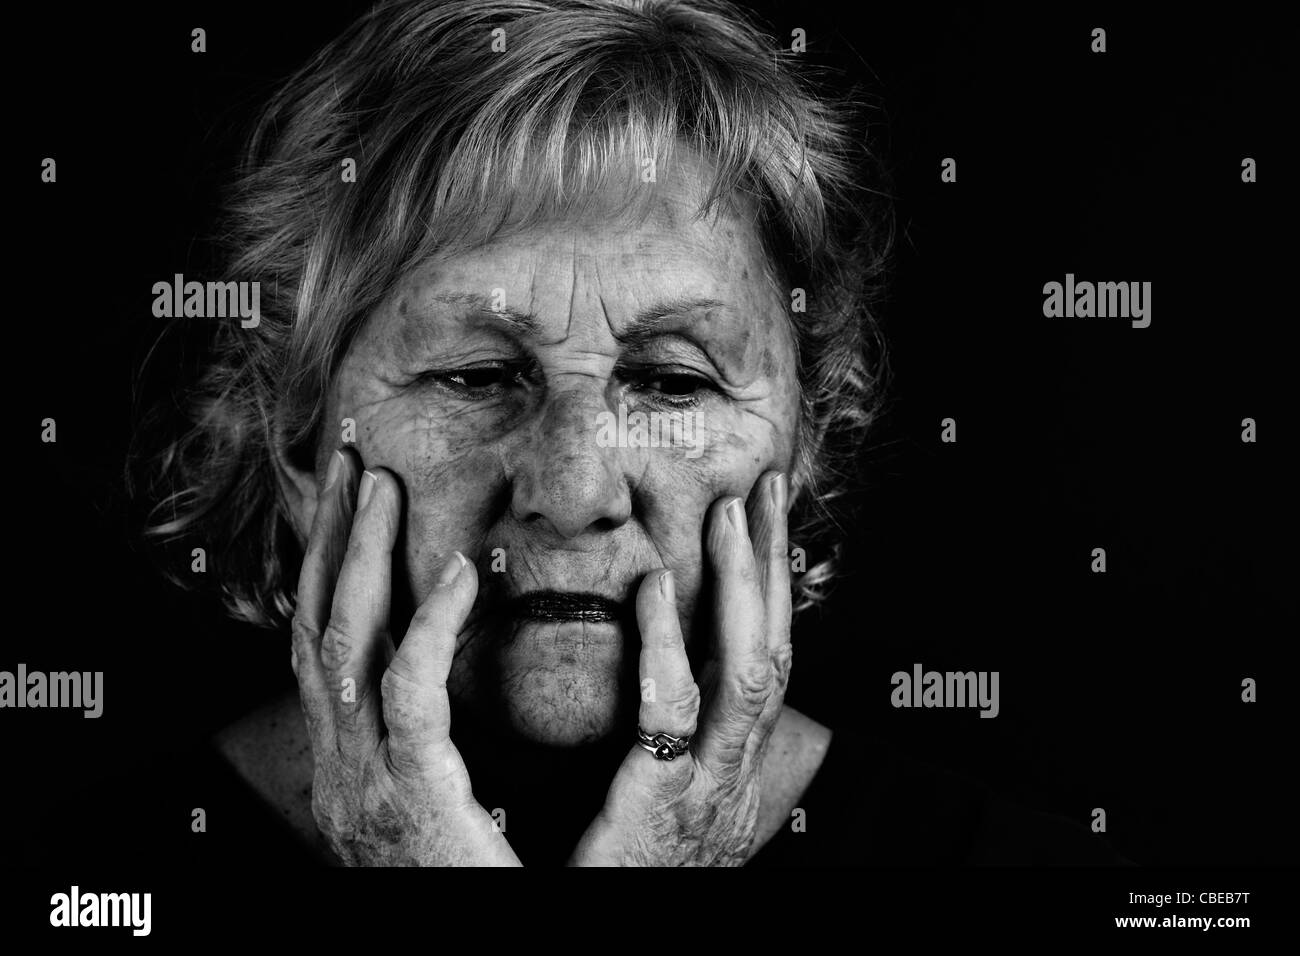 Creative low key black and white to emphasize dramatic facial expression of senior woman. Stock Photo